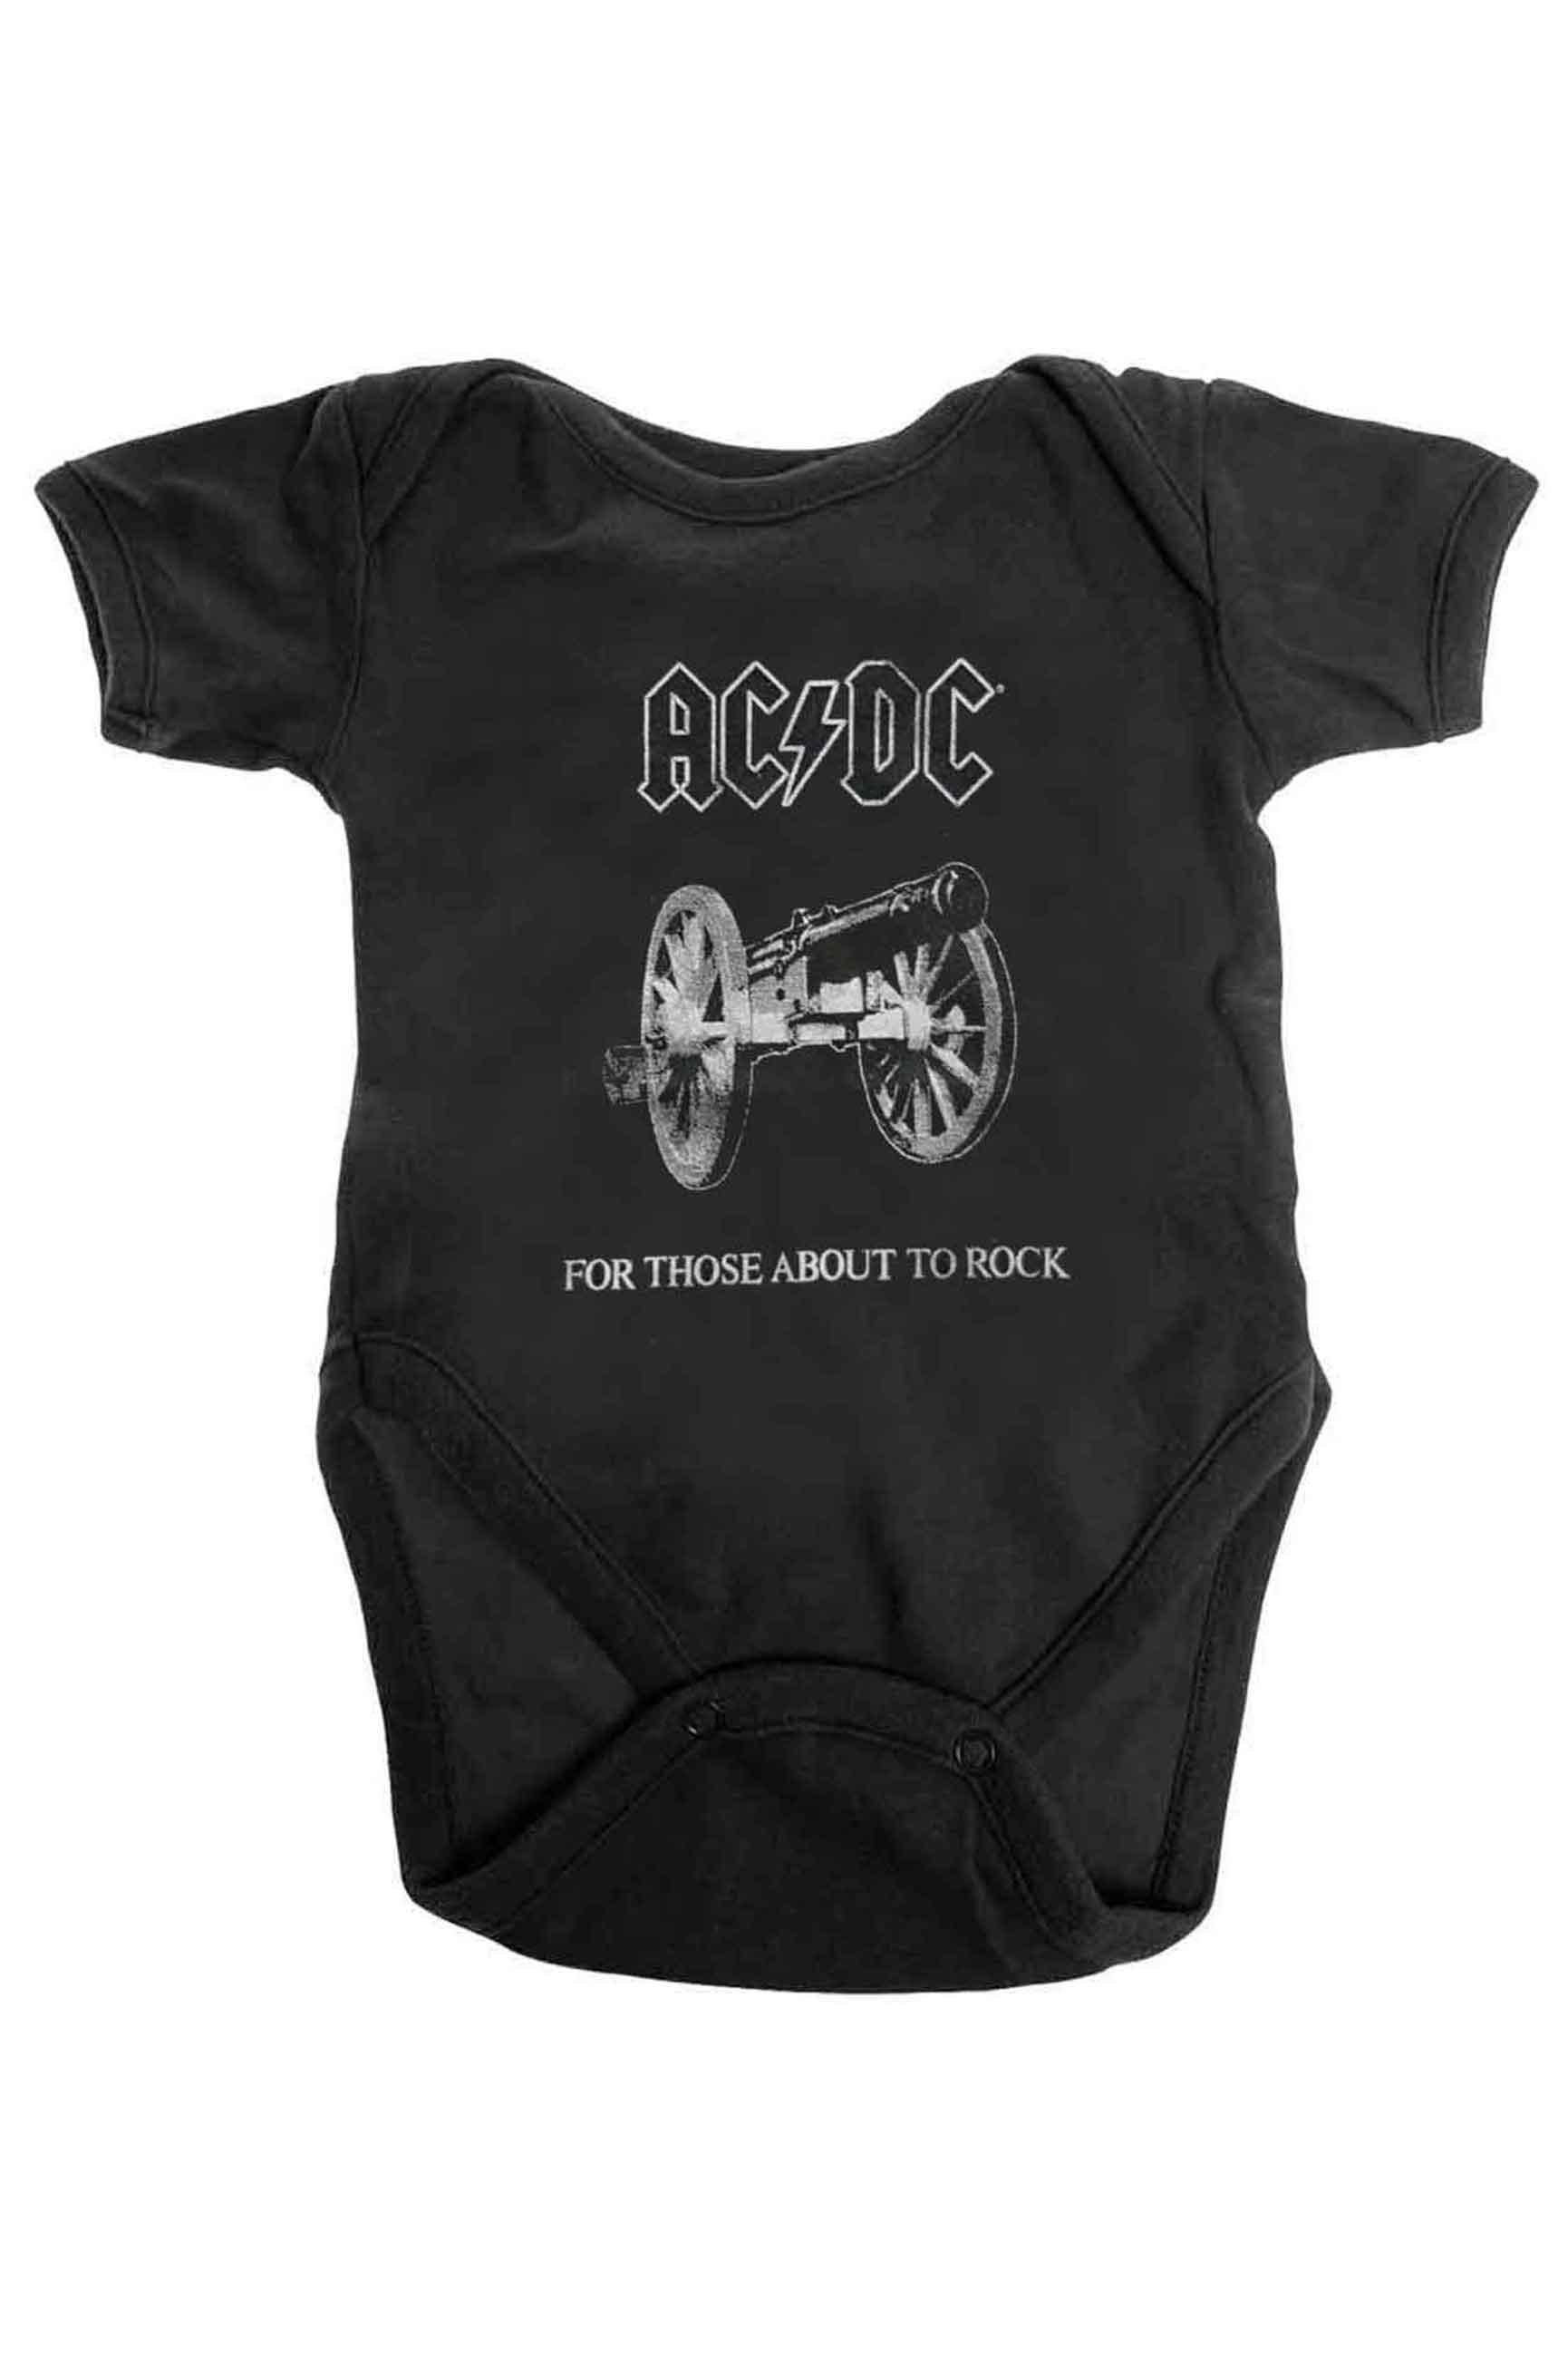 AC/DC Baby Grow About to Rock Band Logo new Official Black 0 to 24 Months